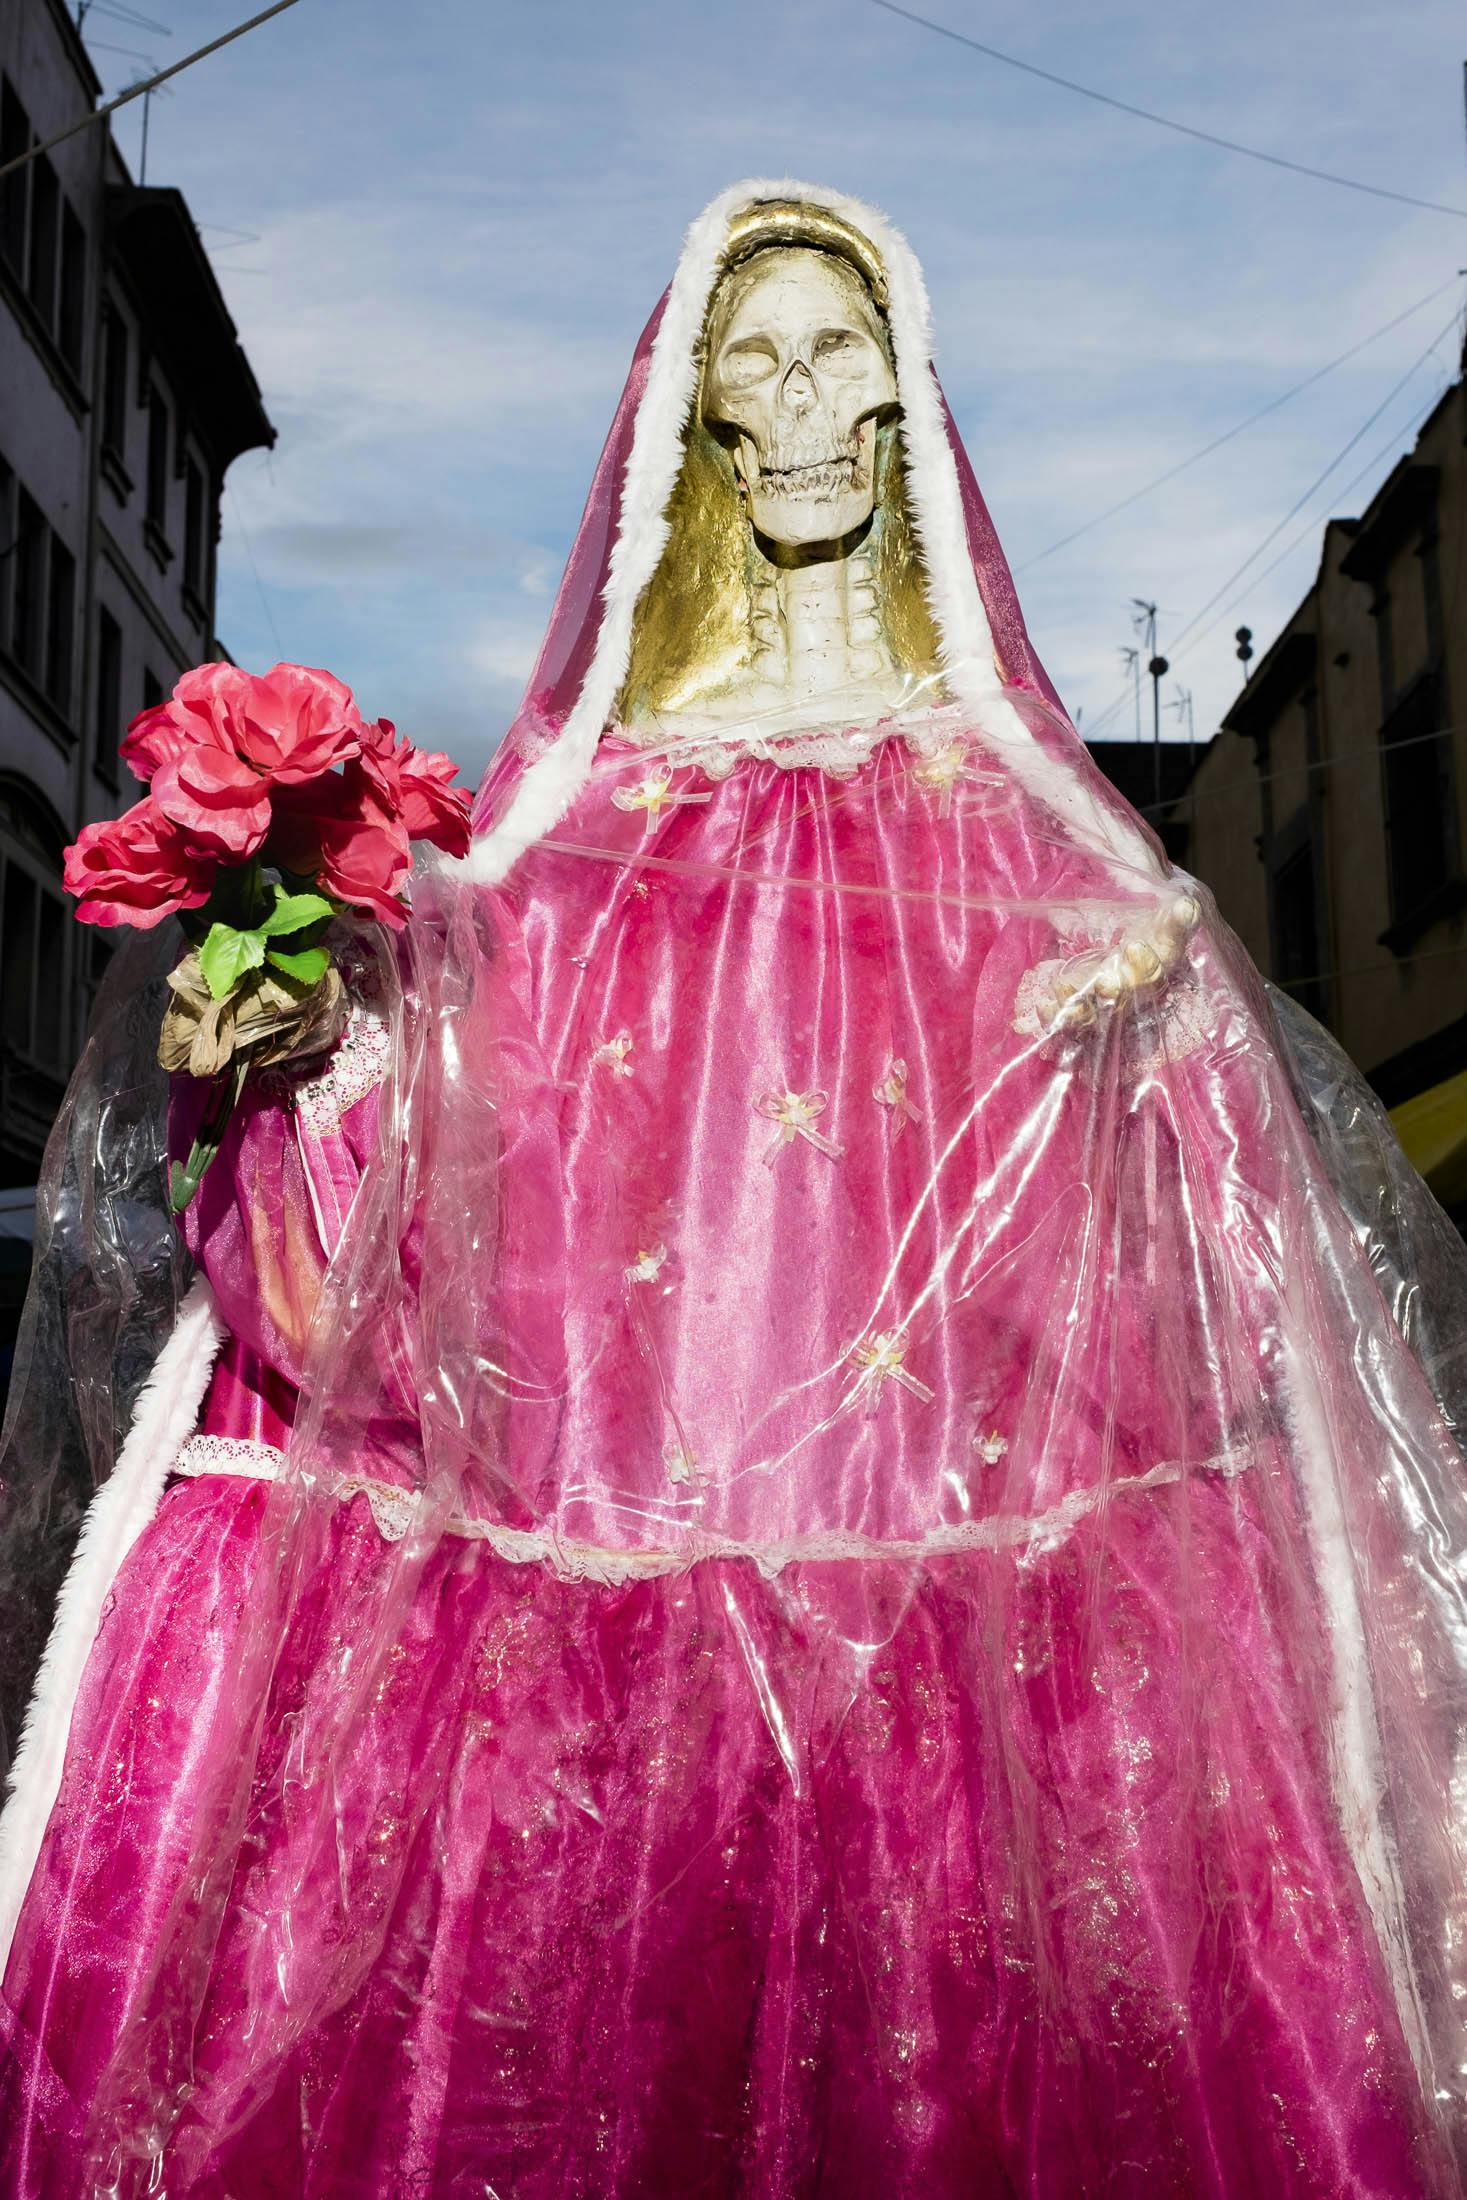 Pink skeleton day of the dead holding roses in Mexico